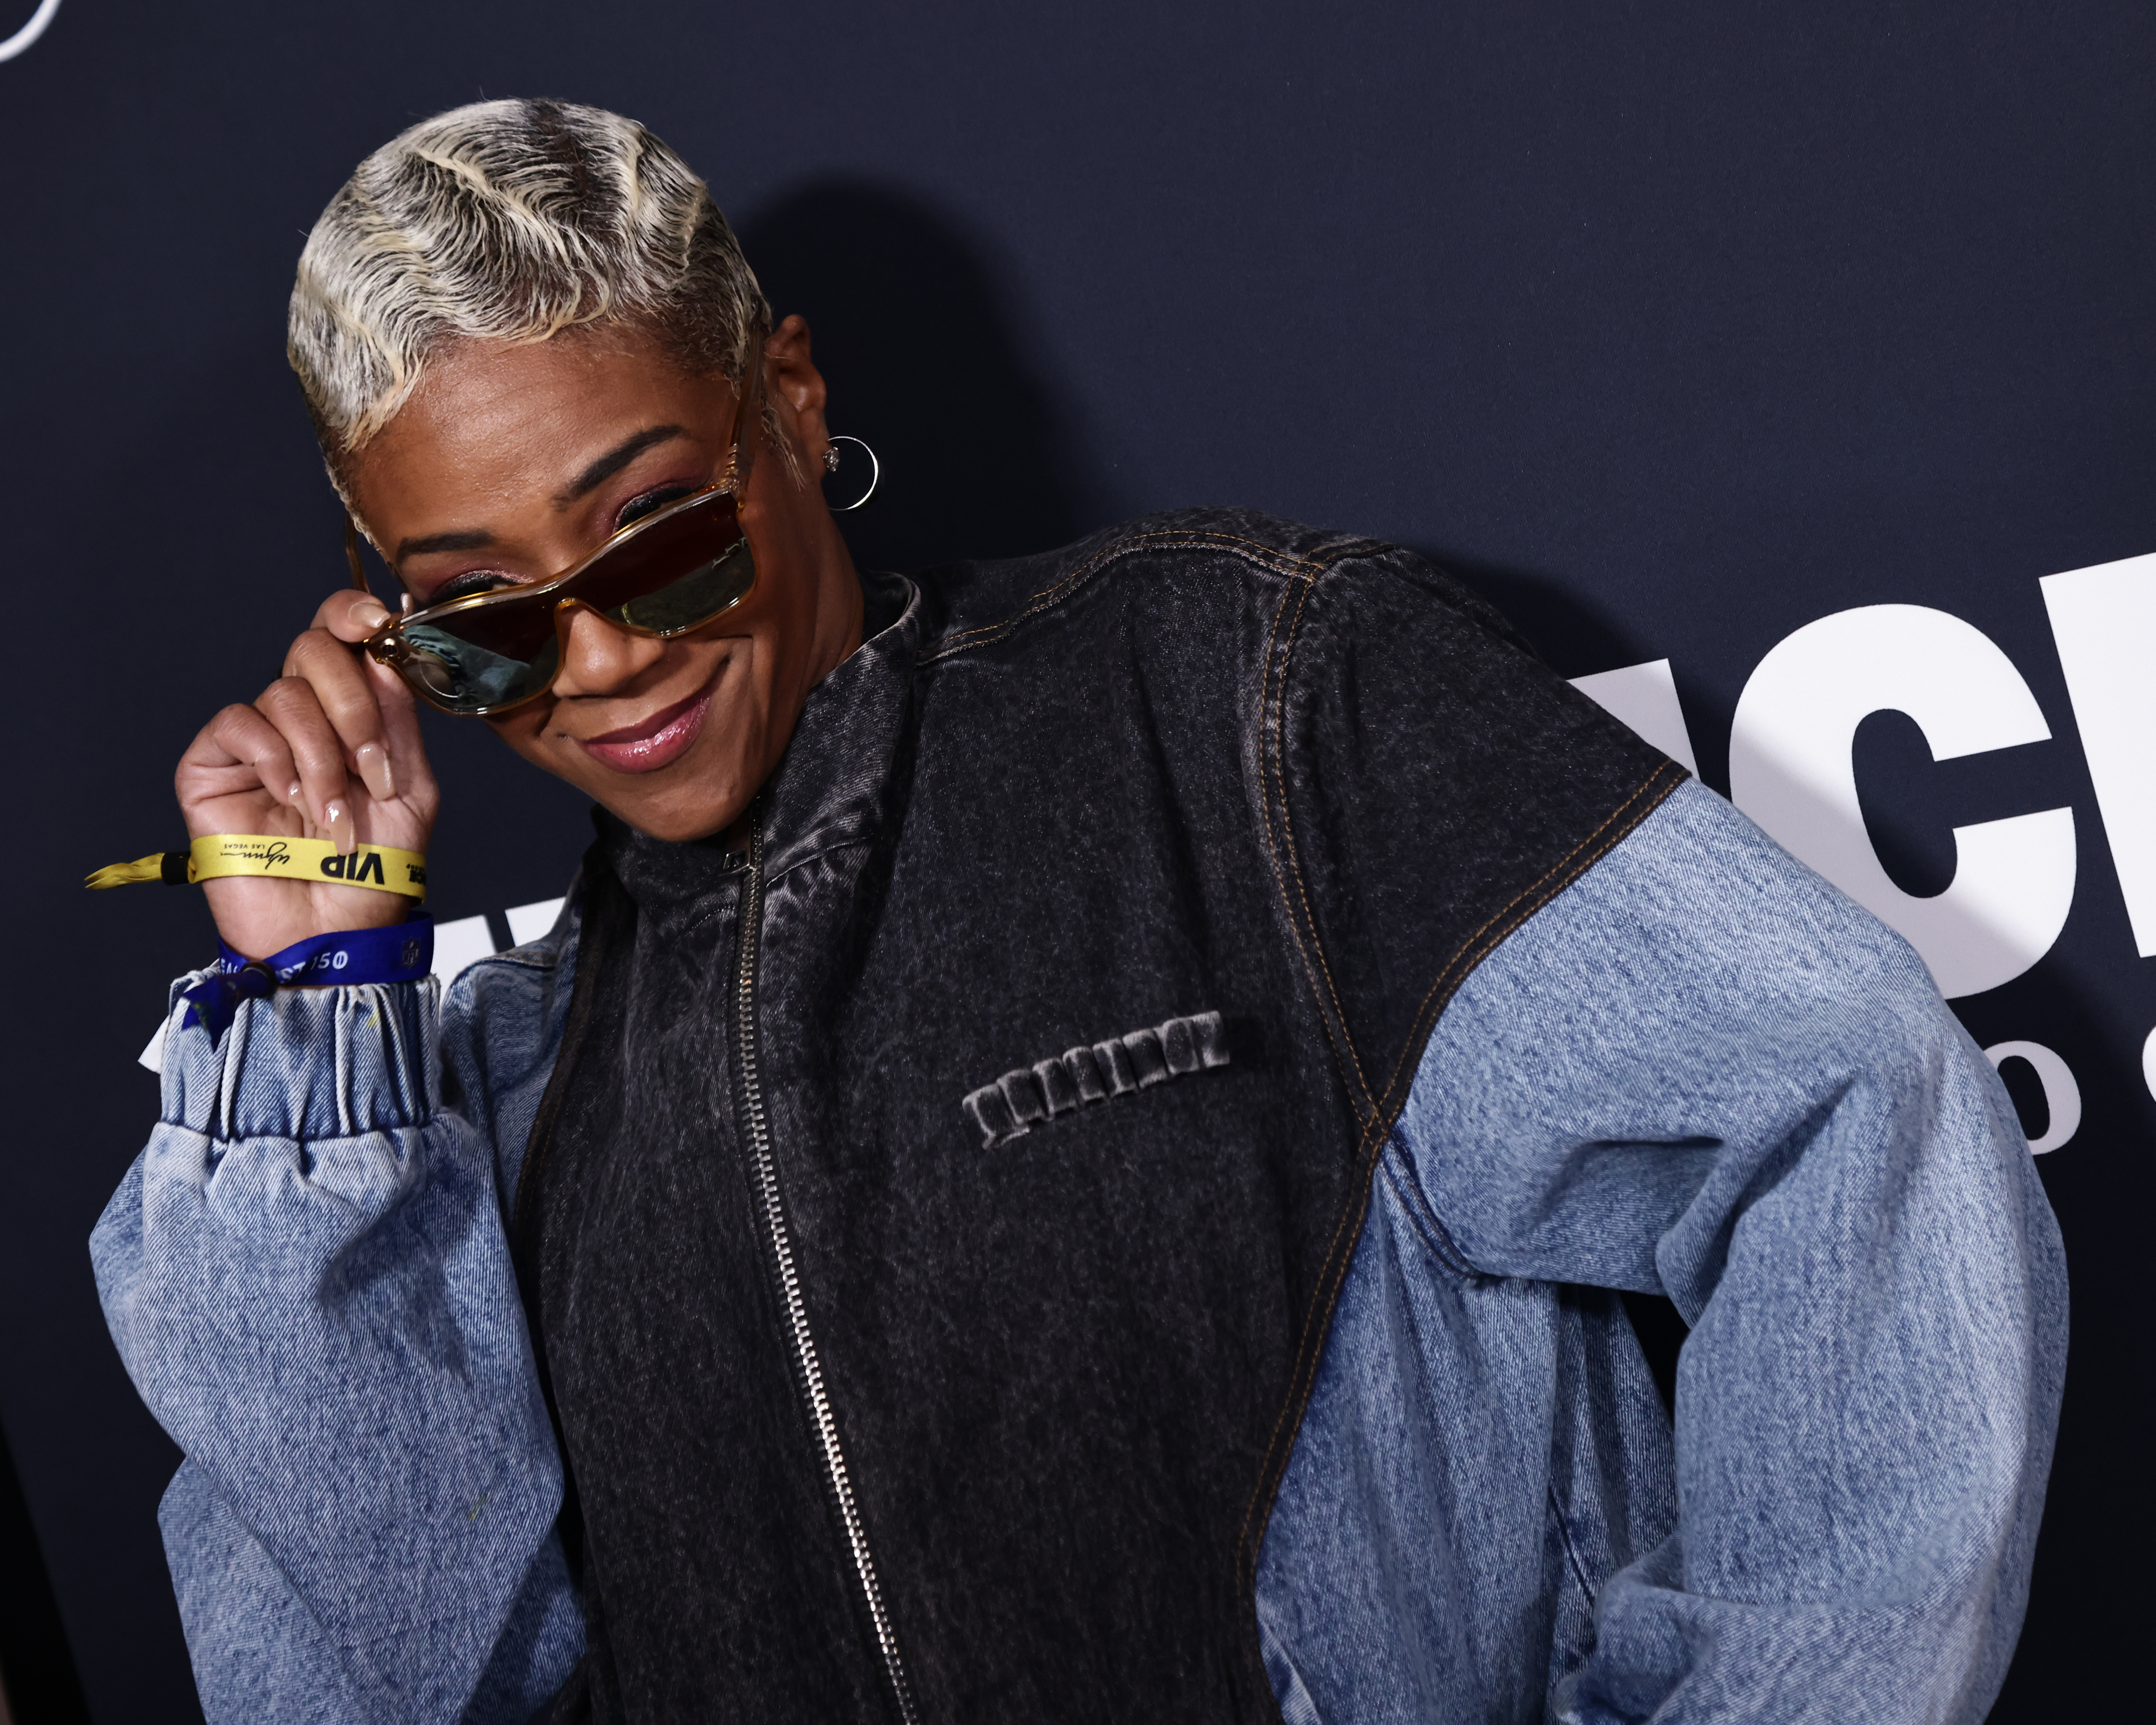 Tiffany Haddish posing confidently, wearing a denim jacket, with sunglasses and hoop earrings